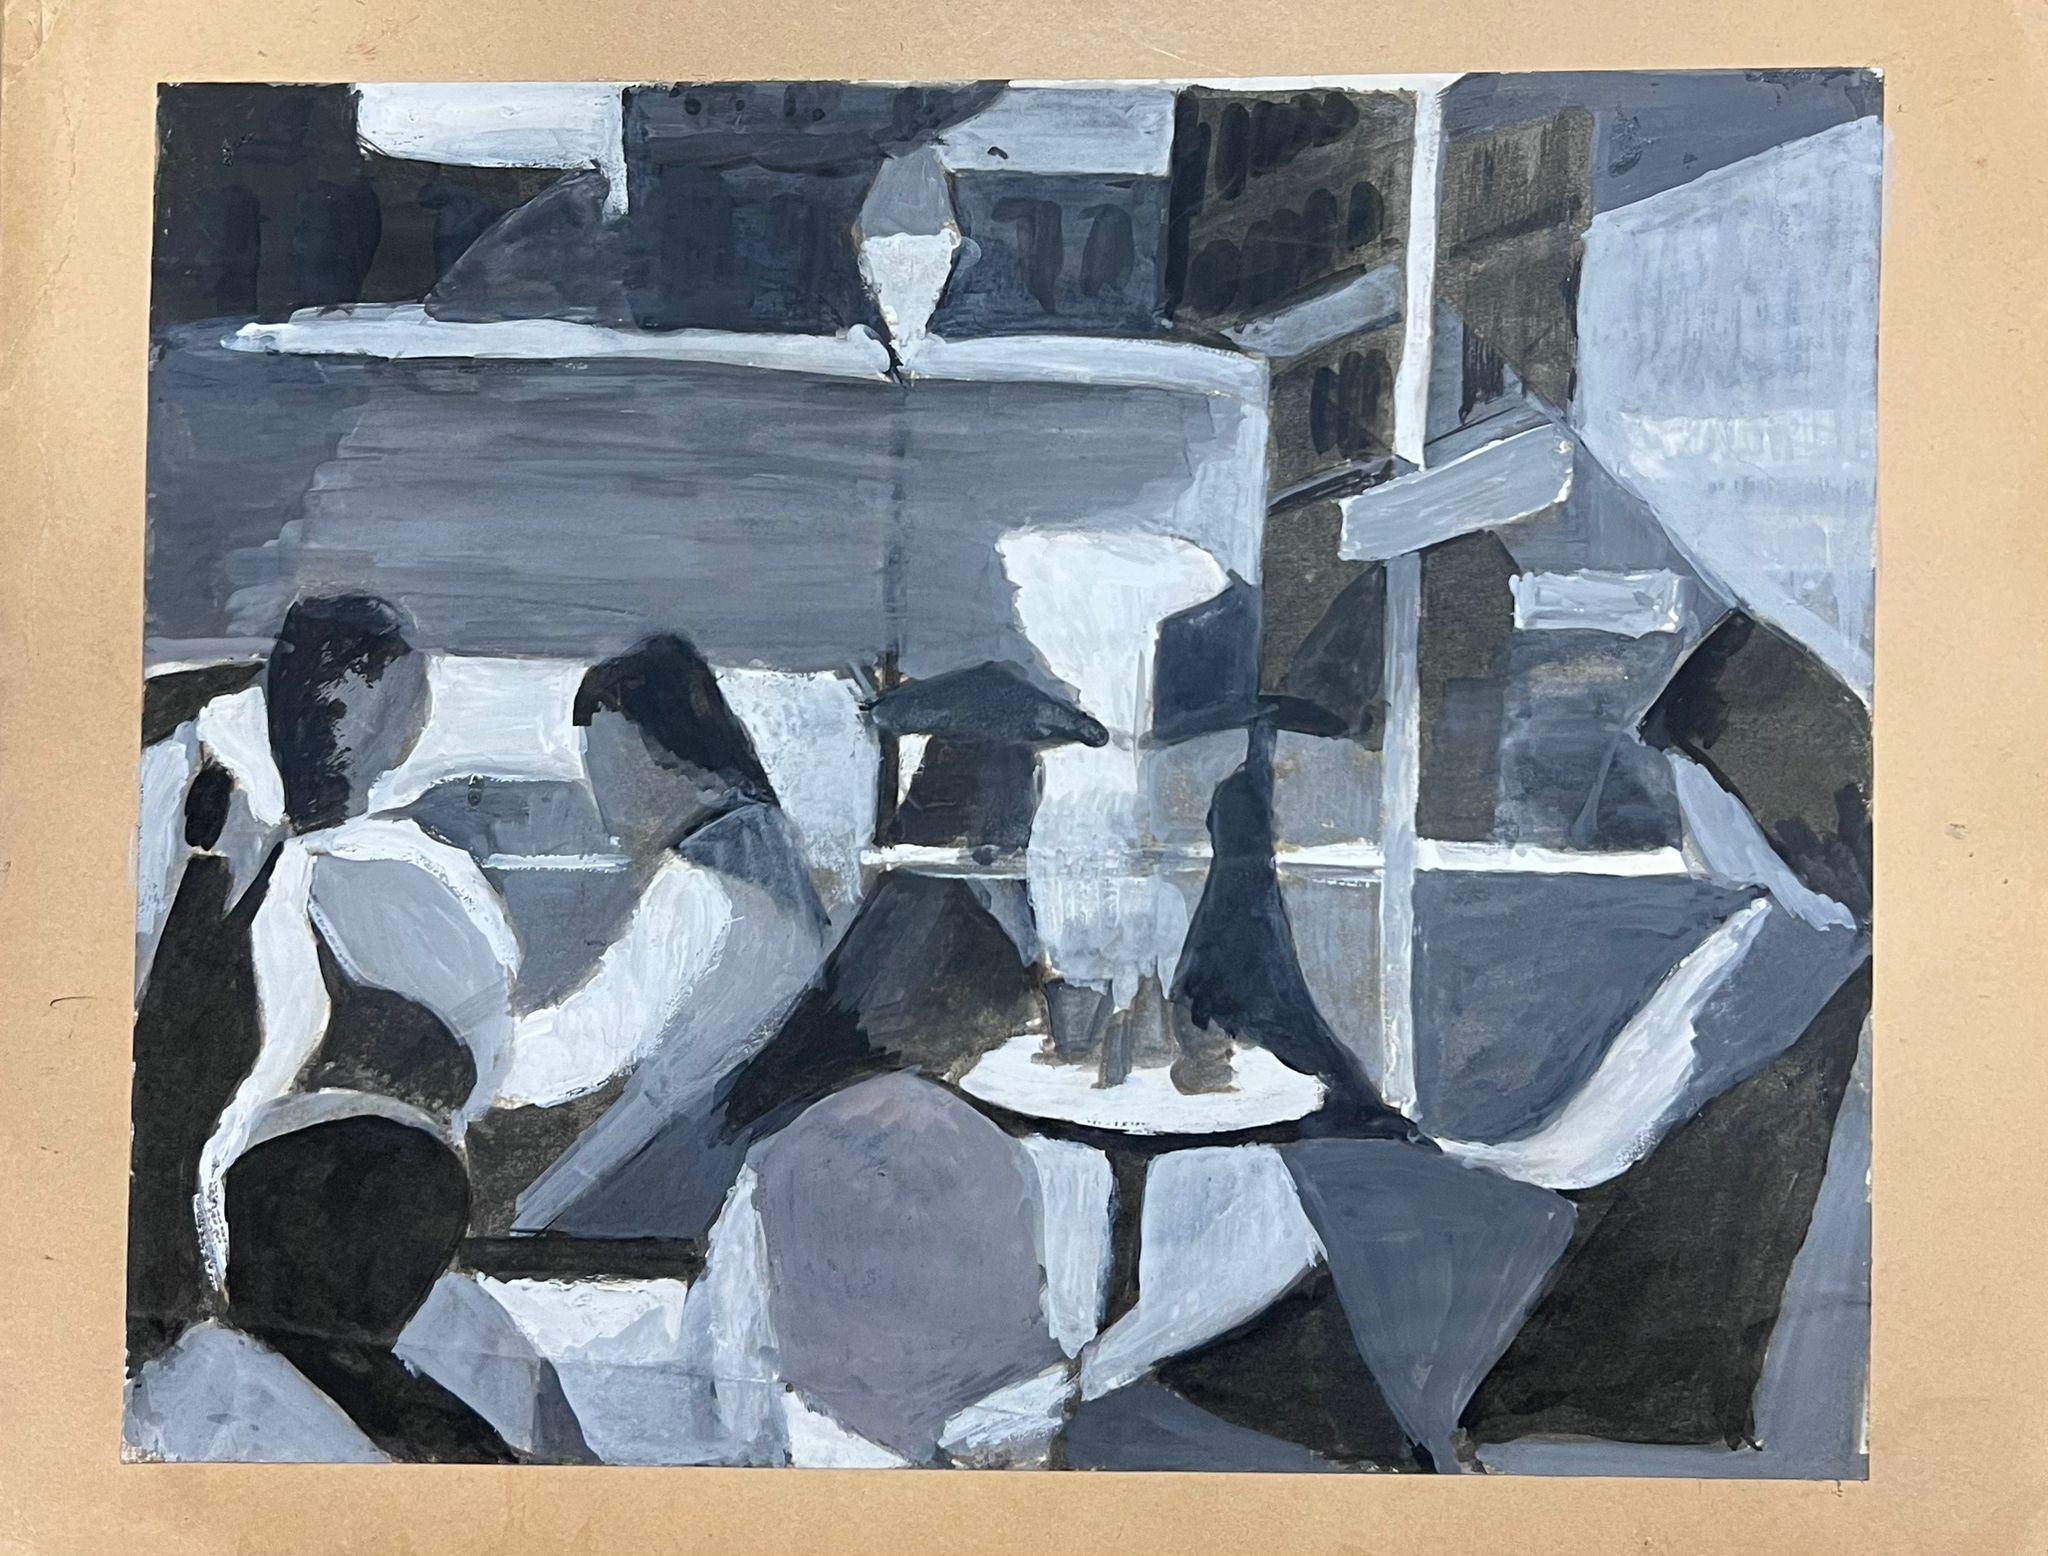 Figures In Restraunt
by Guy Nicod
(French 1923 - 2021)
gouache paper stuck on artist paper, unframed
painting : 10 x 13 inches
provenance: artists estate, France
condition: very good and sound condition